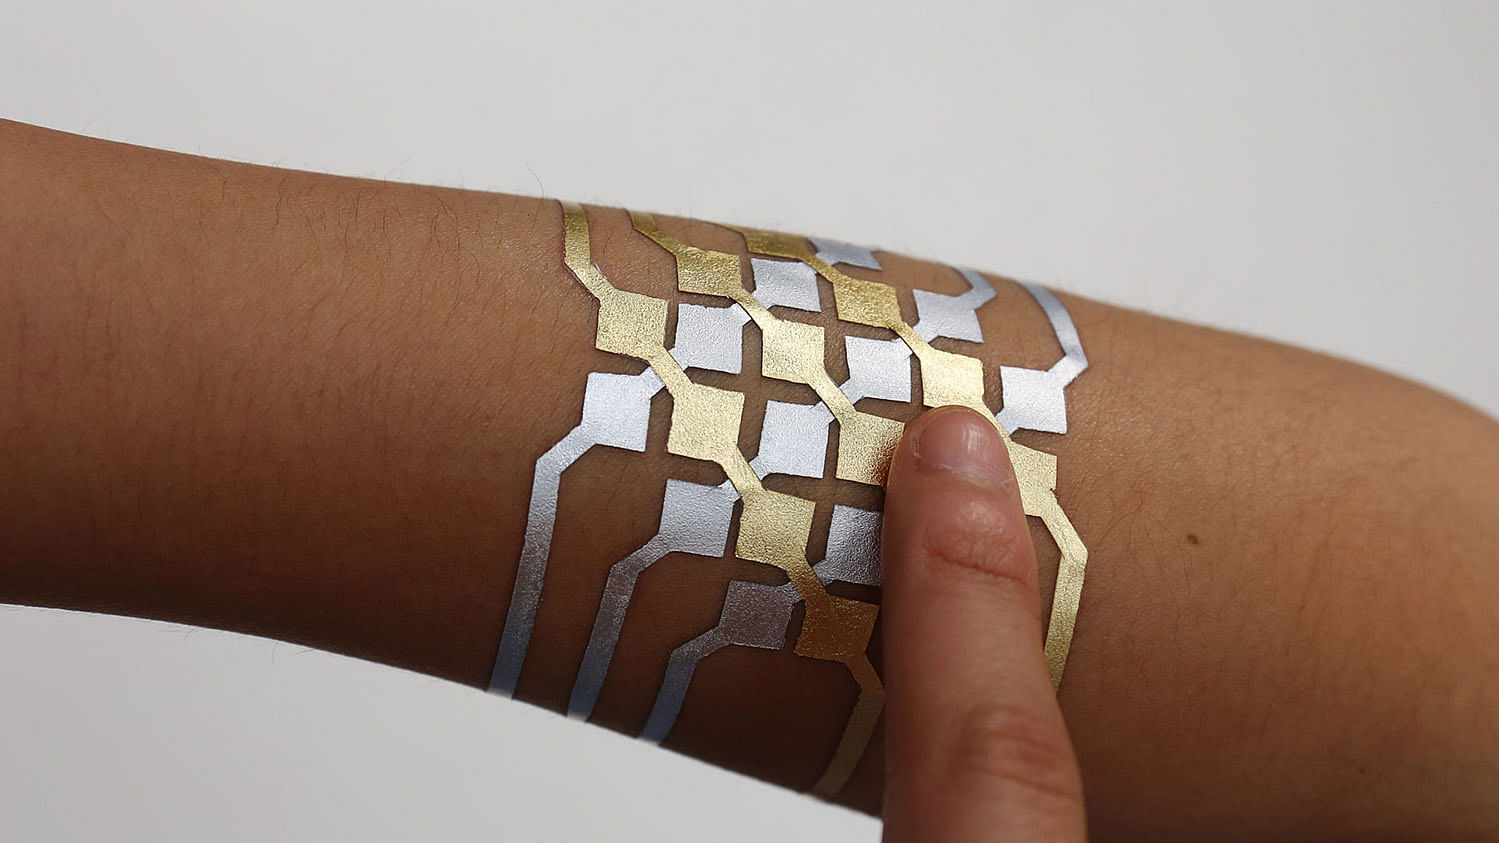 The tattoos can be used to store data and send instructions to other devices. (Photo Courtesy: <a href="http://duoskin.media.mit.edu/">DuoSkin</a>)